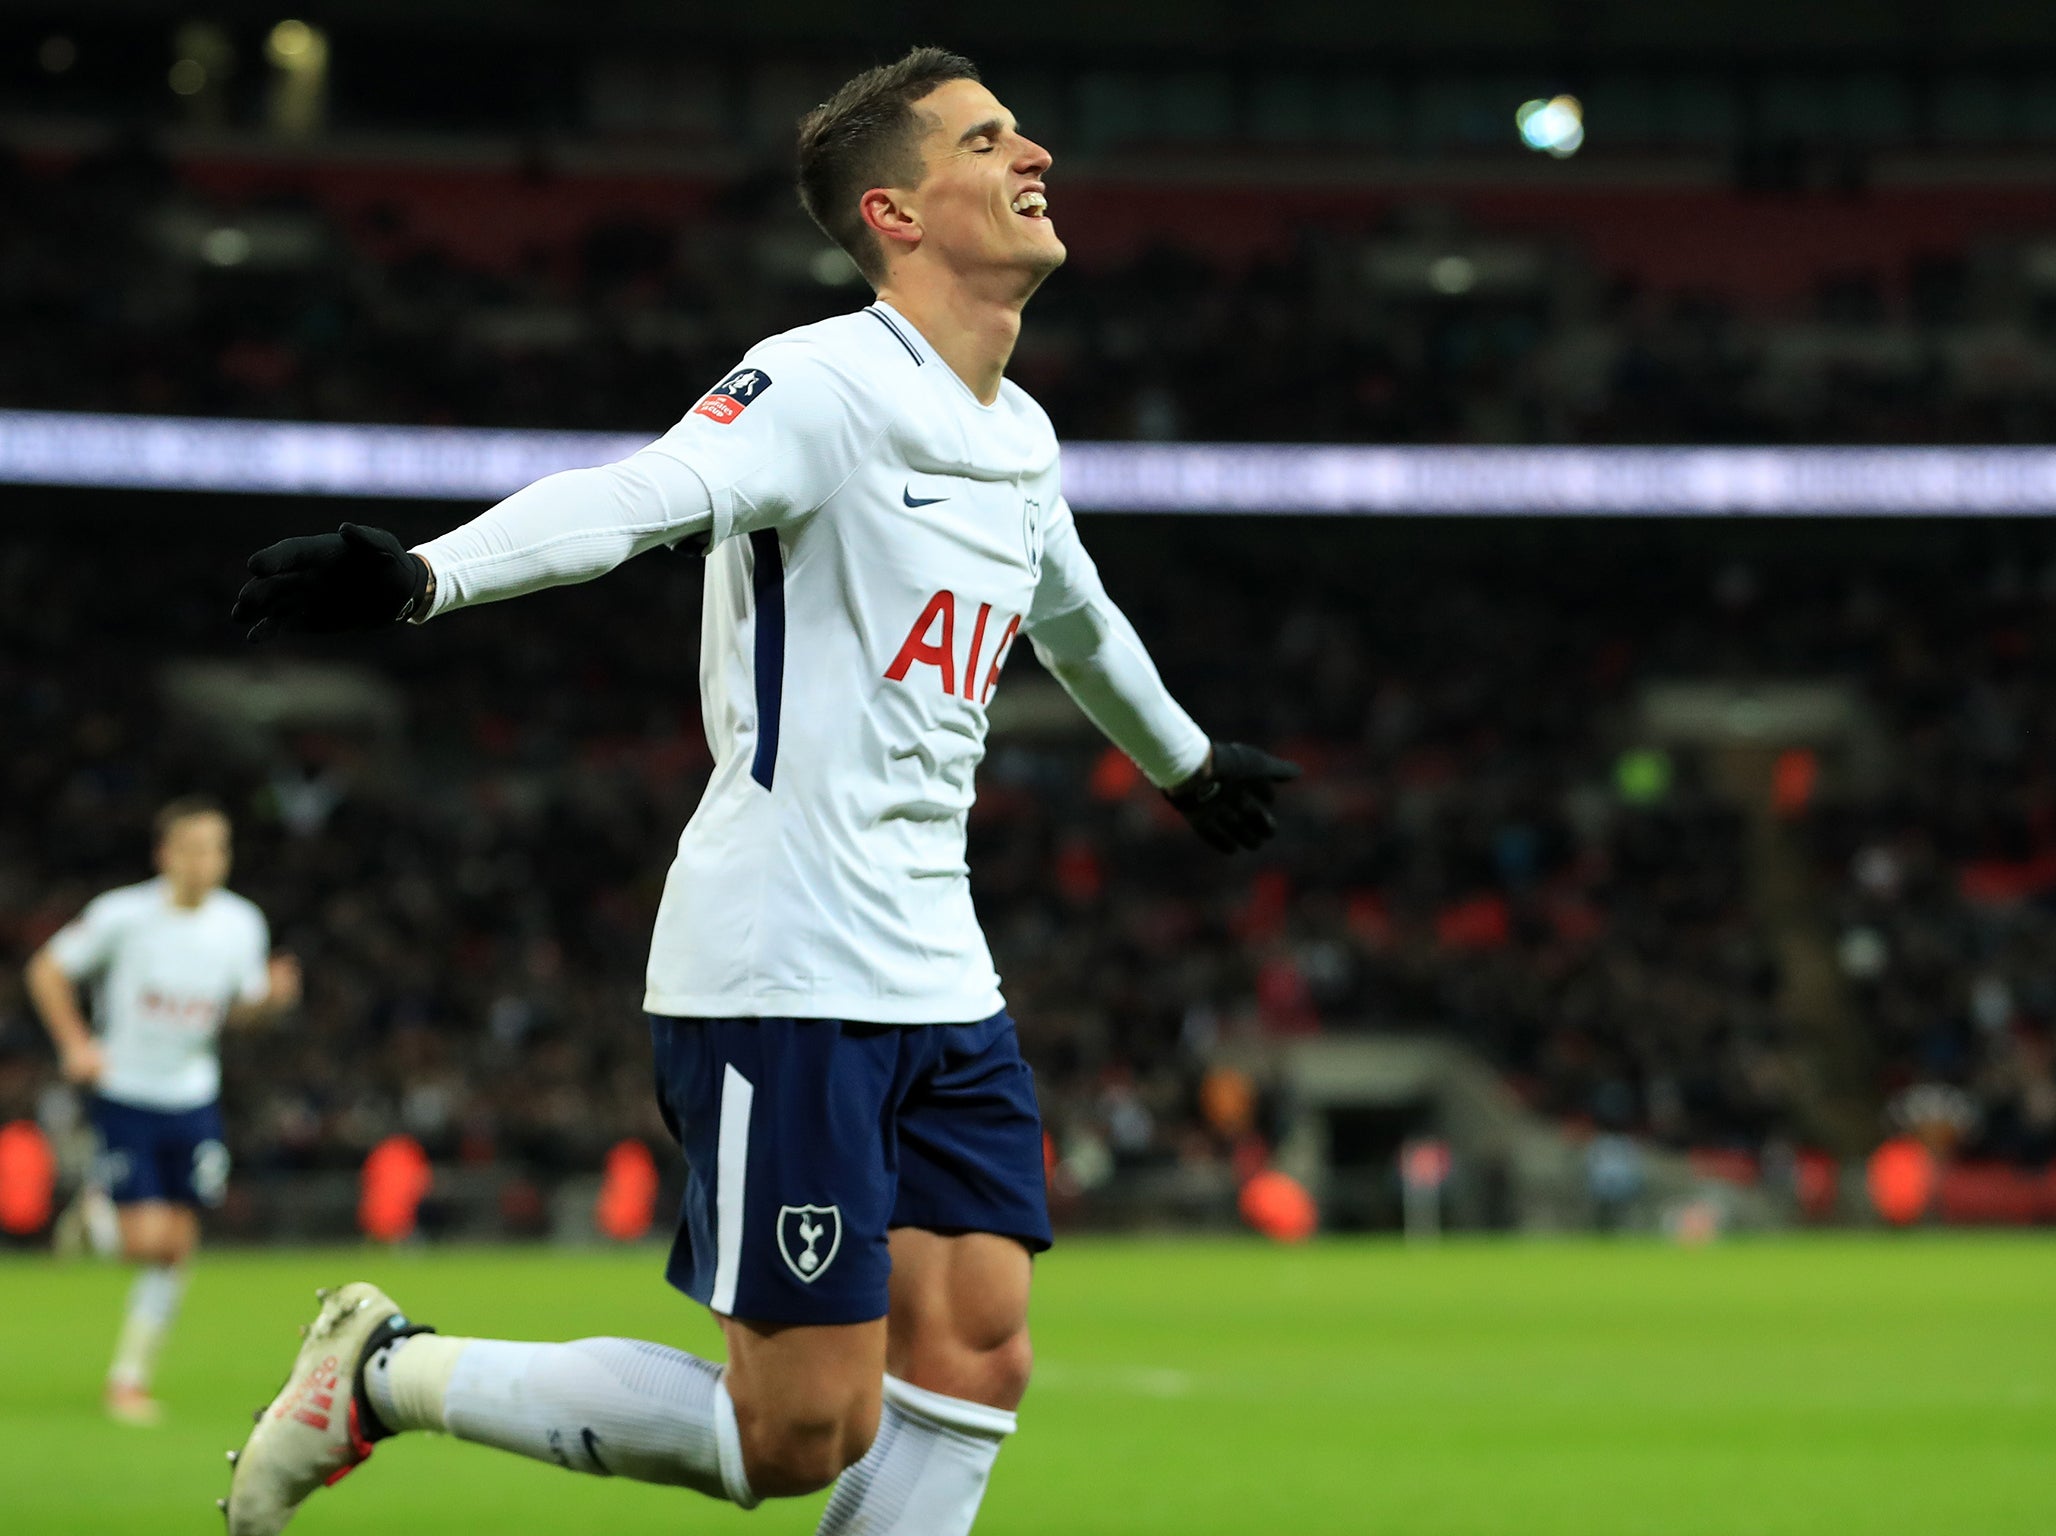 Tottenham Hotspur ease past brave Newport County in FA Cup fourth round replay to set up Rochdale clash